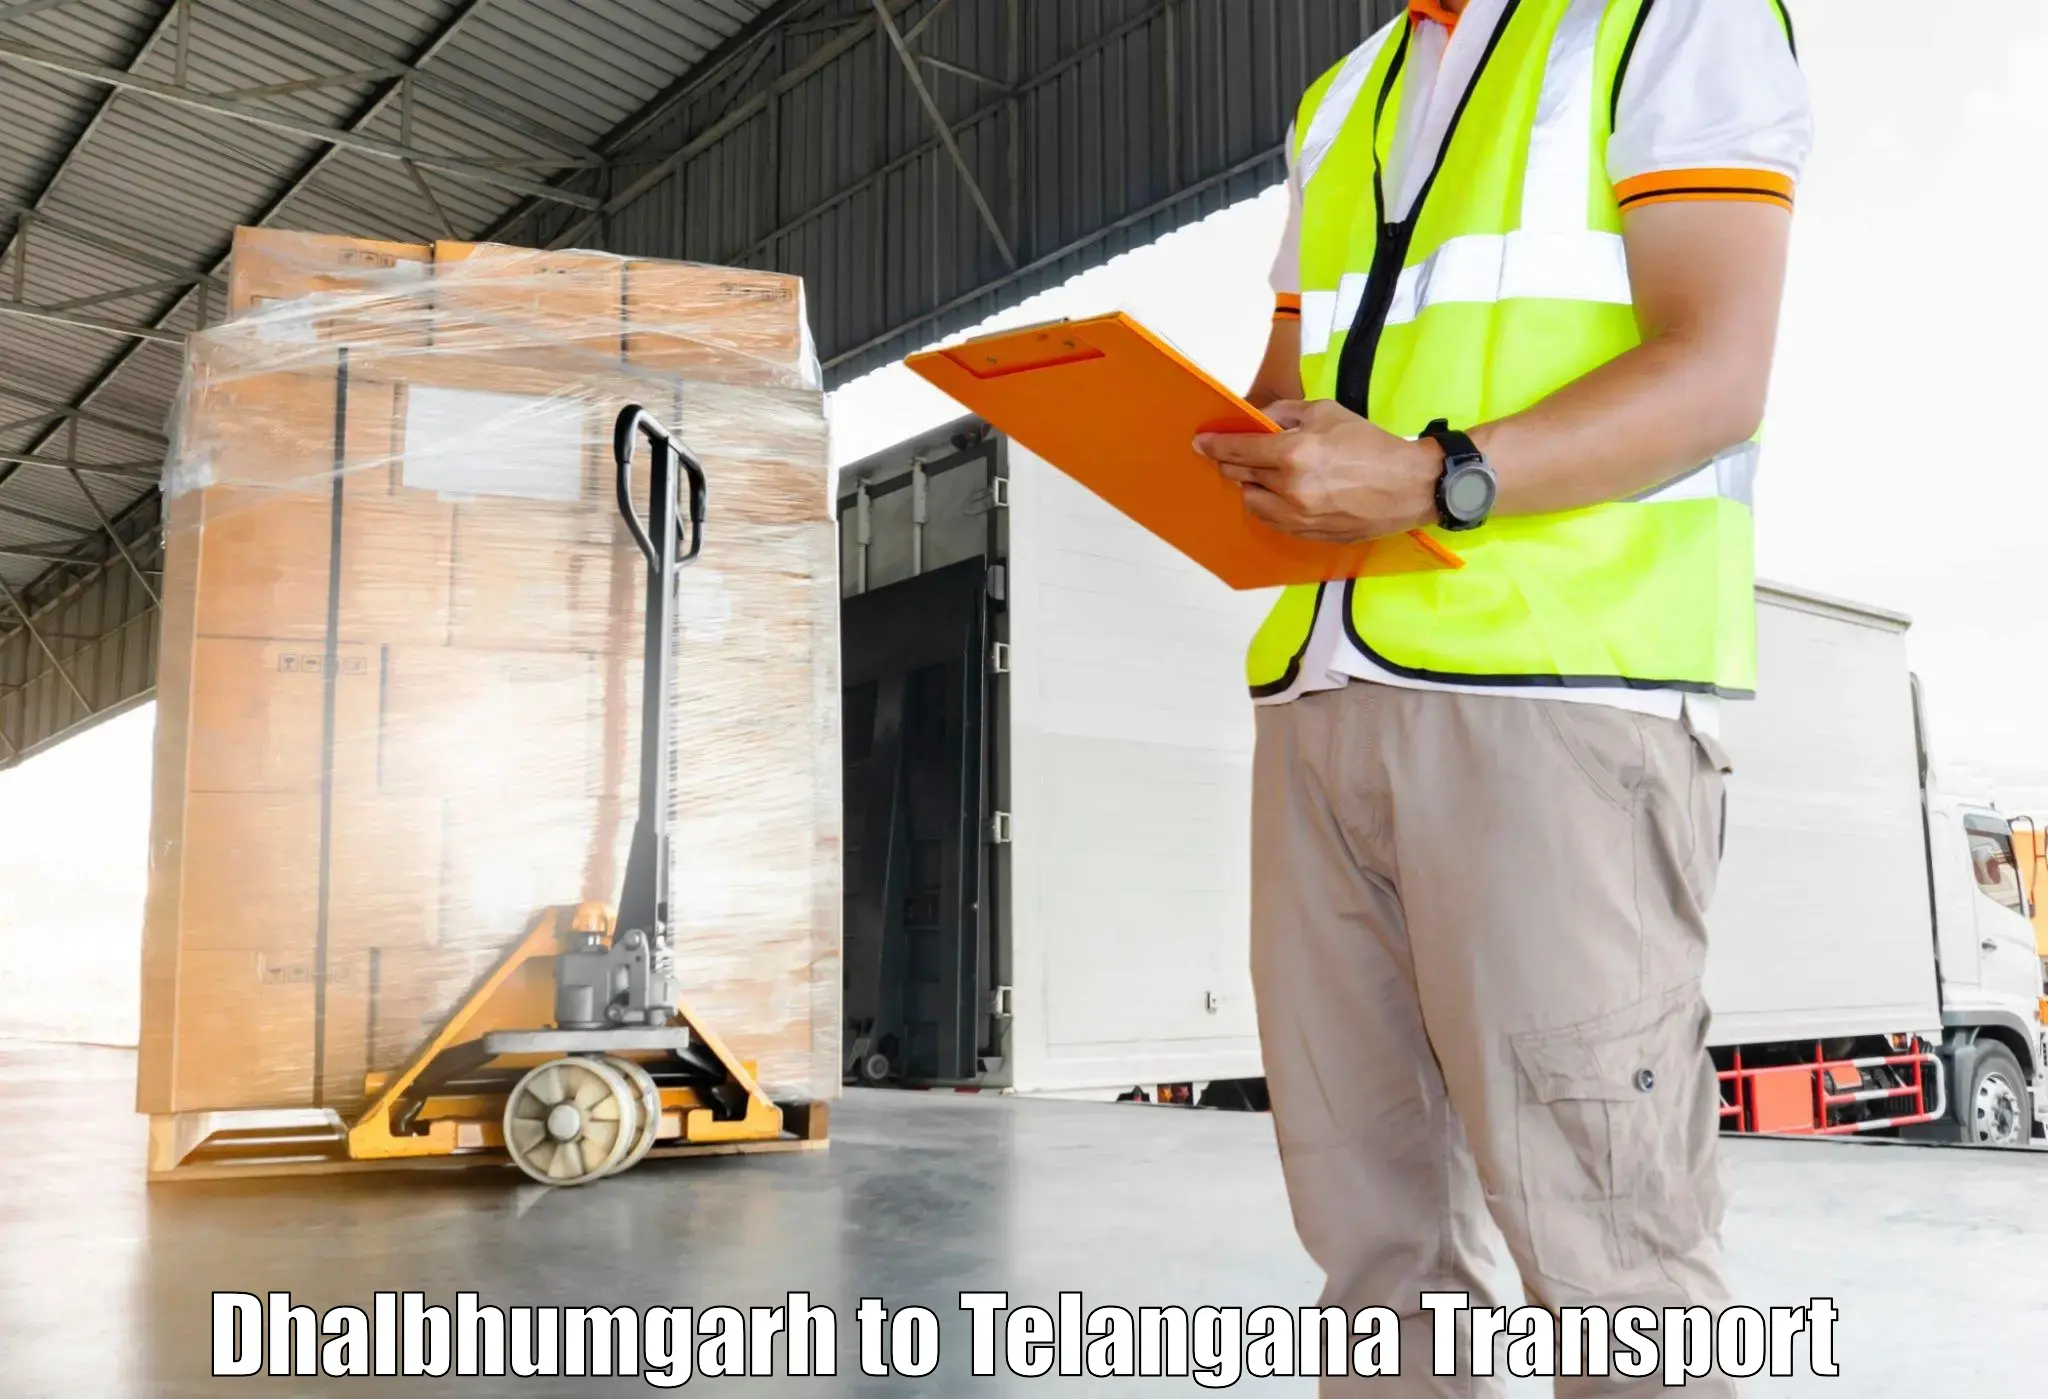 Container transport service in Dhalbhumgarh to Gollapalli